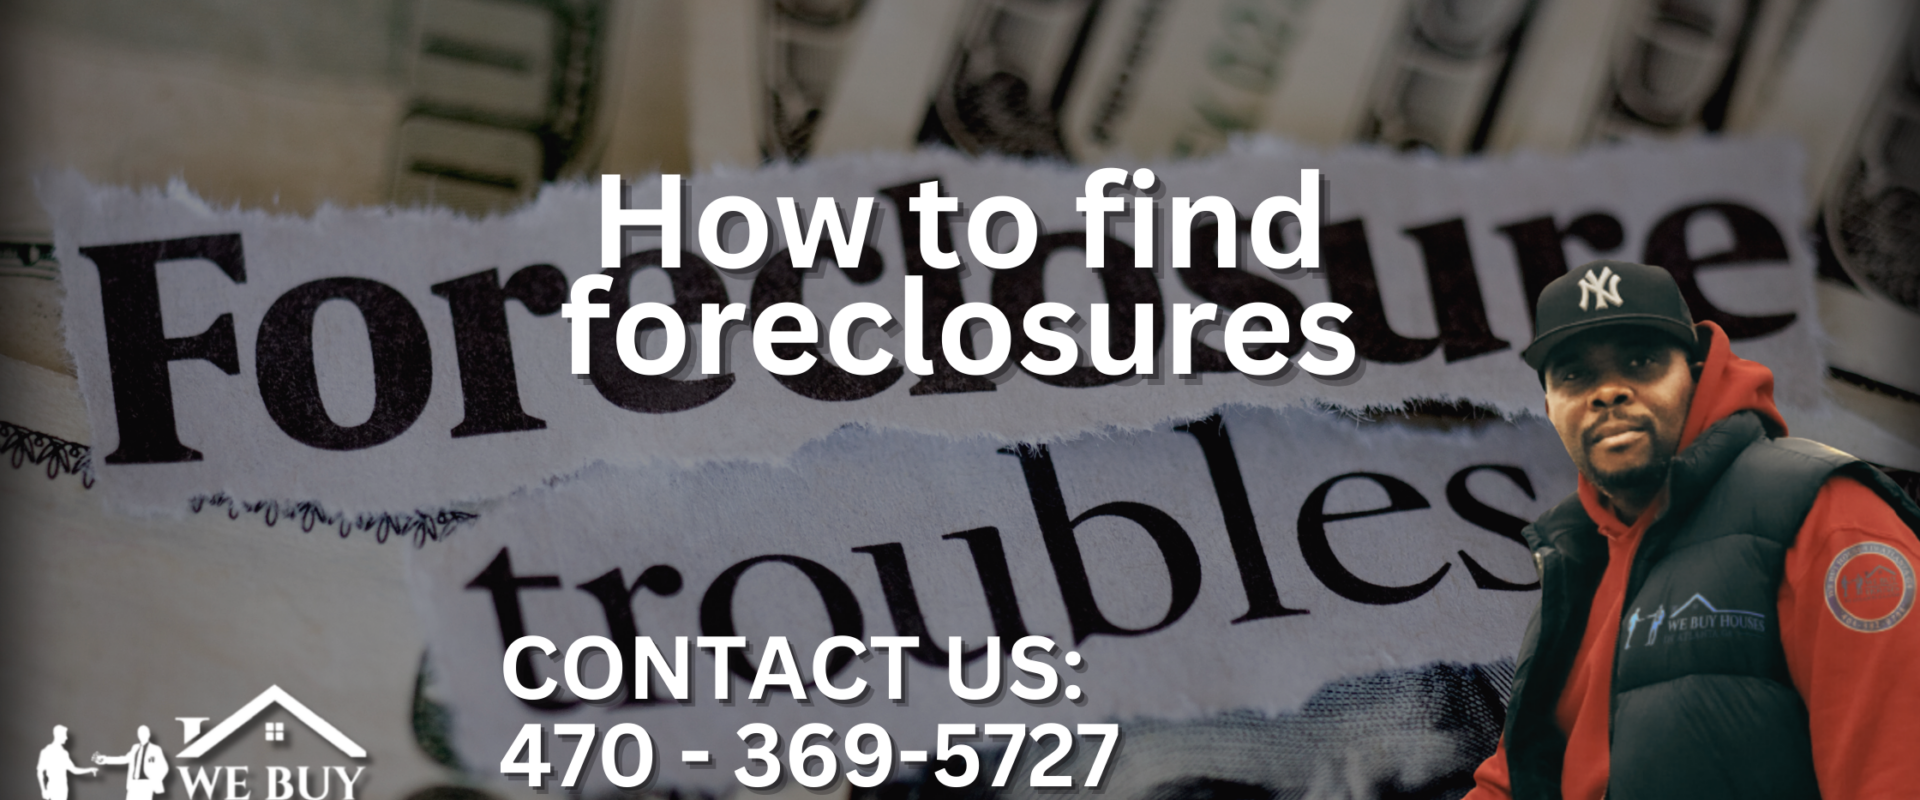 How-to-find-foreclosures